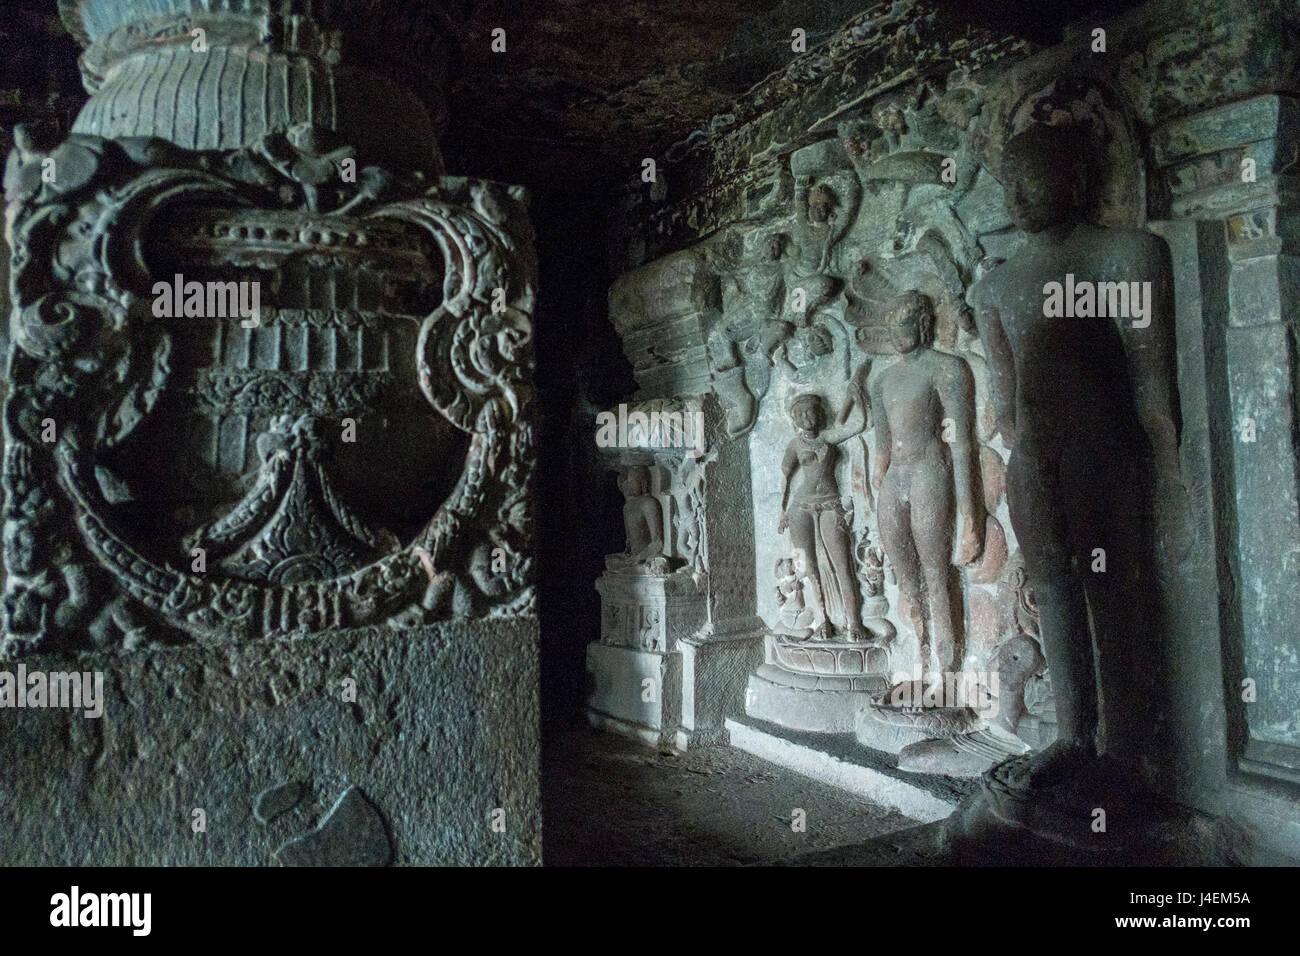 Jain thirthankaras carved in stone inside one of the cave temples in Ajanta and Ellora in Maharashtra, India Stock Photo